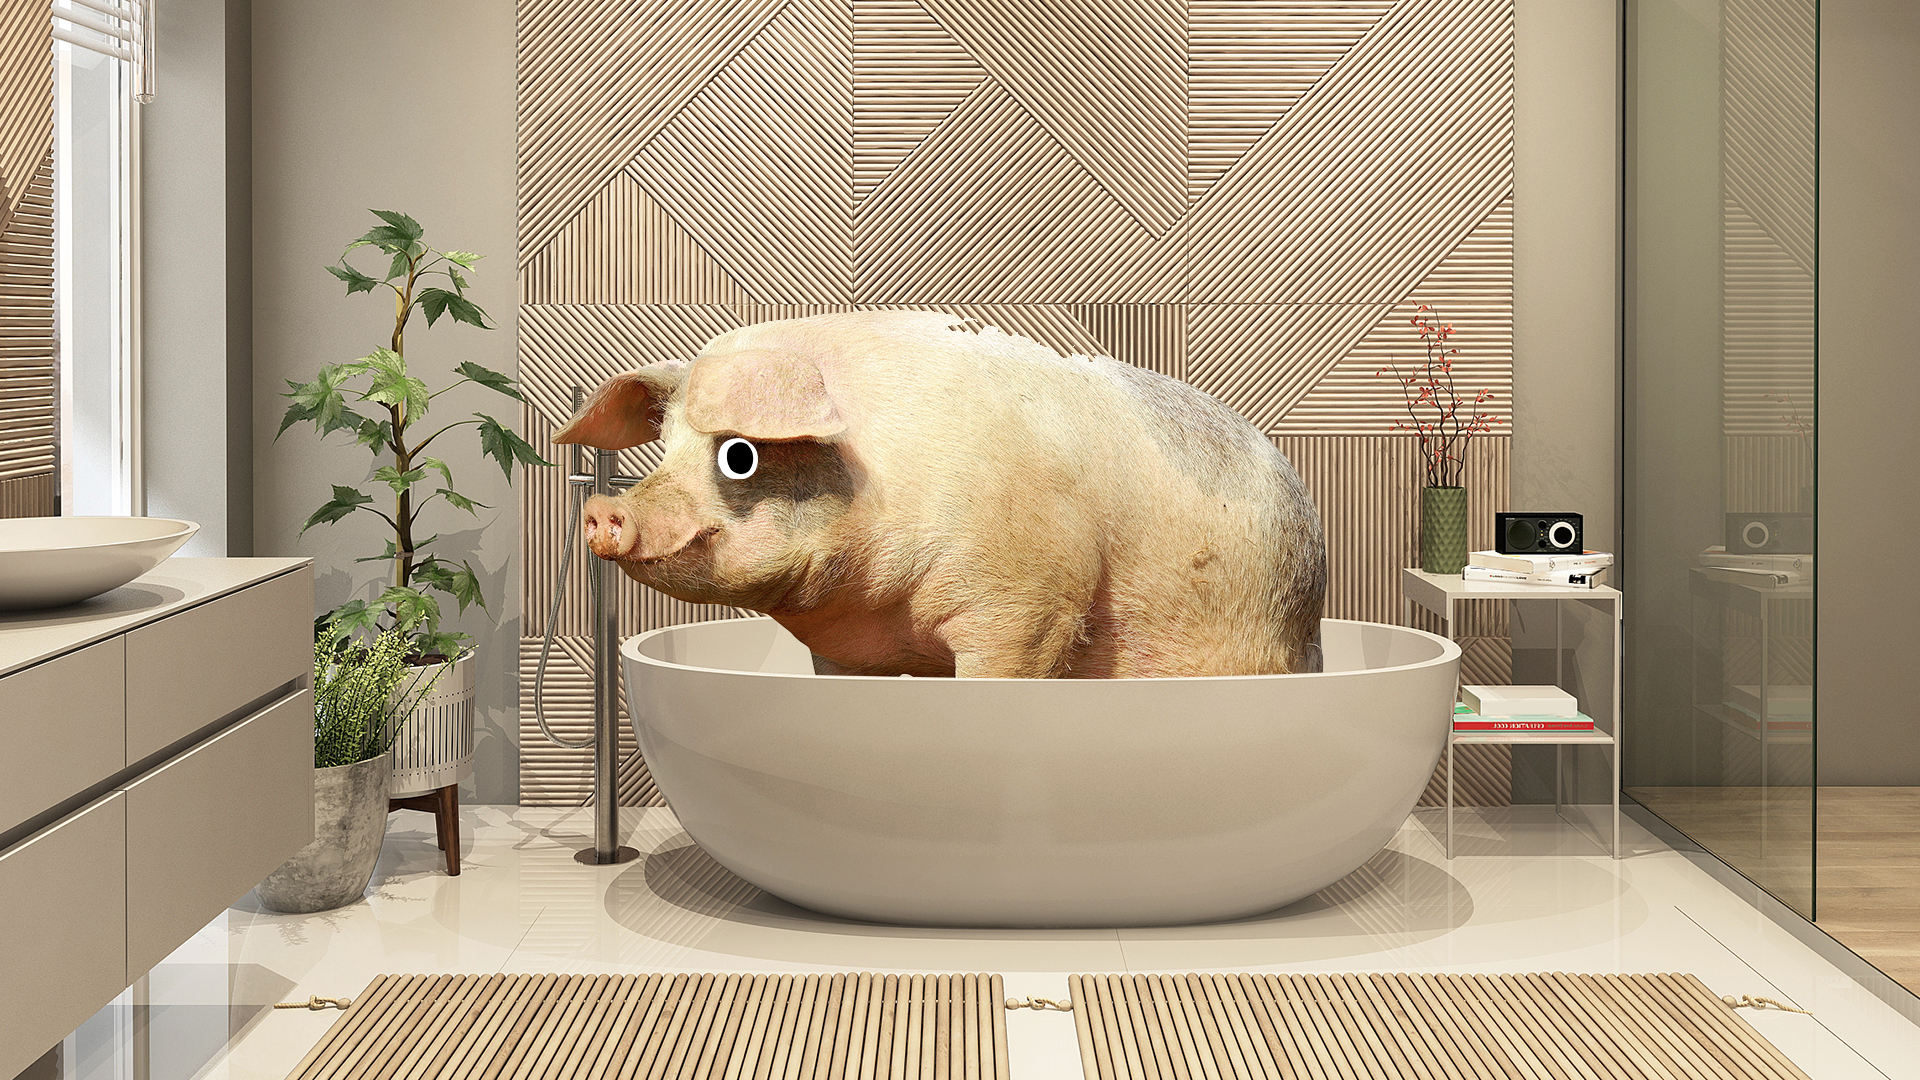 A pig in the bath